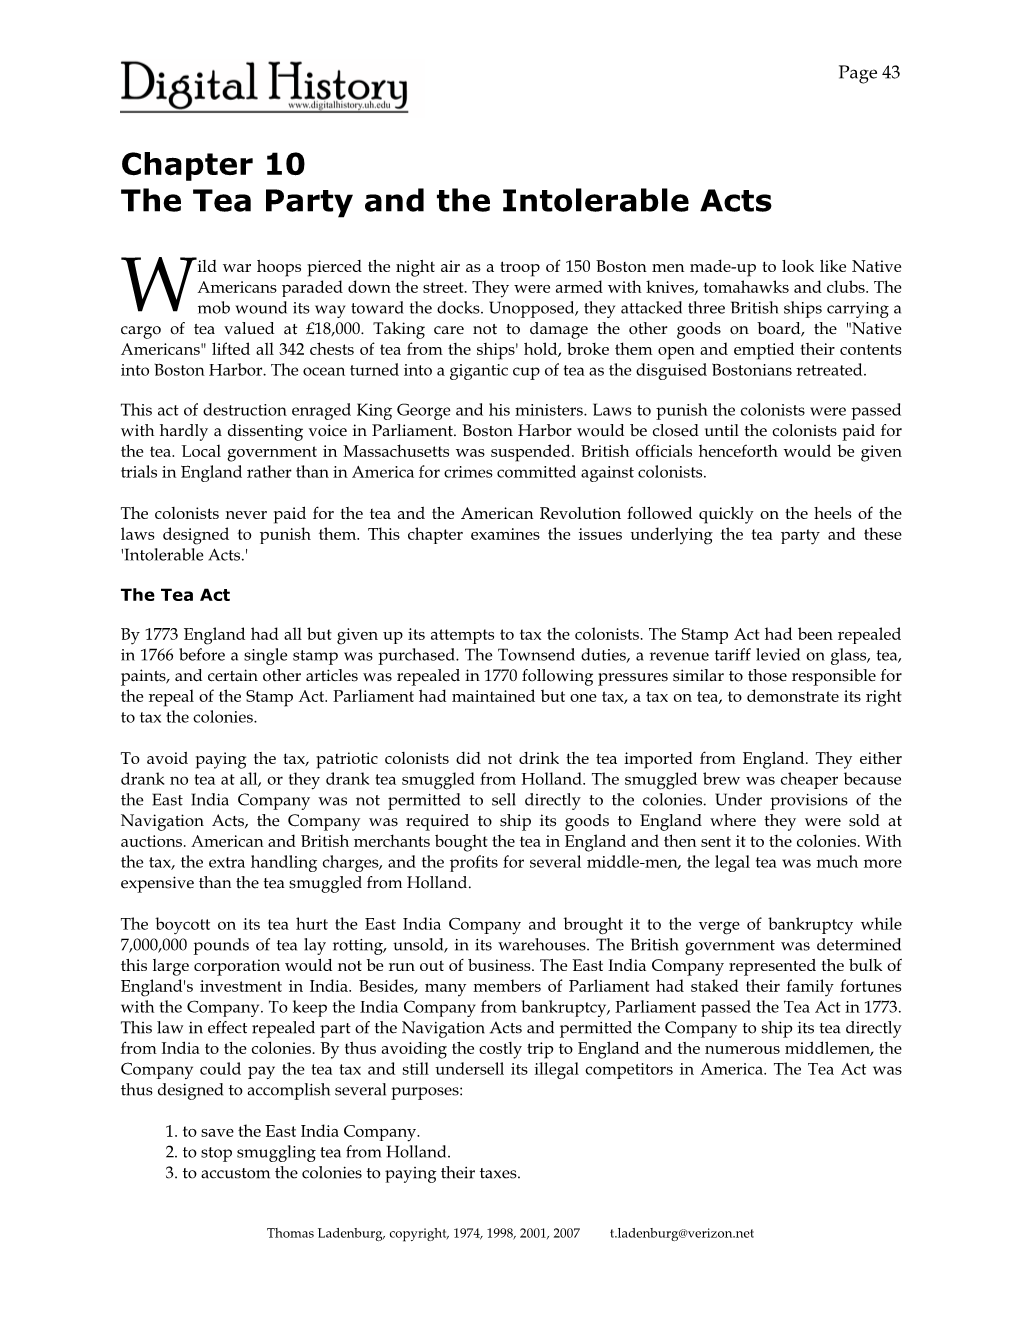 The Boston Tea Party and Intolerable Acts